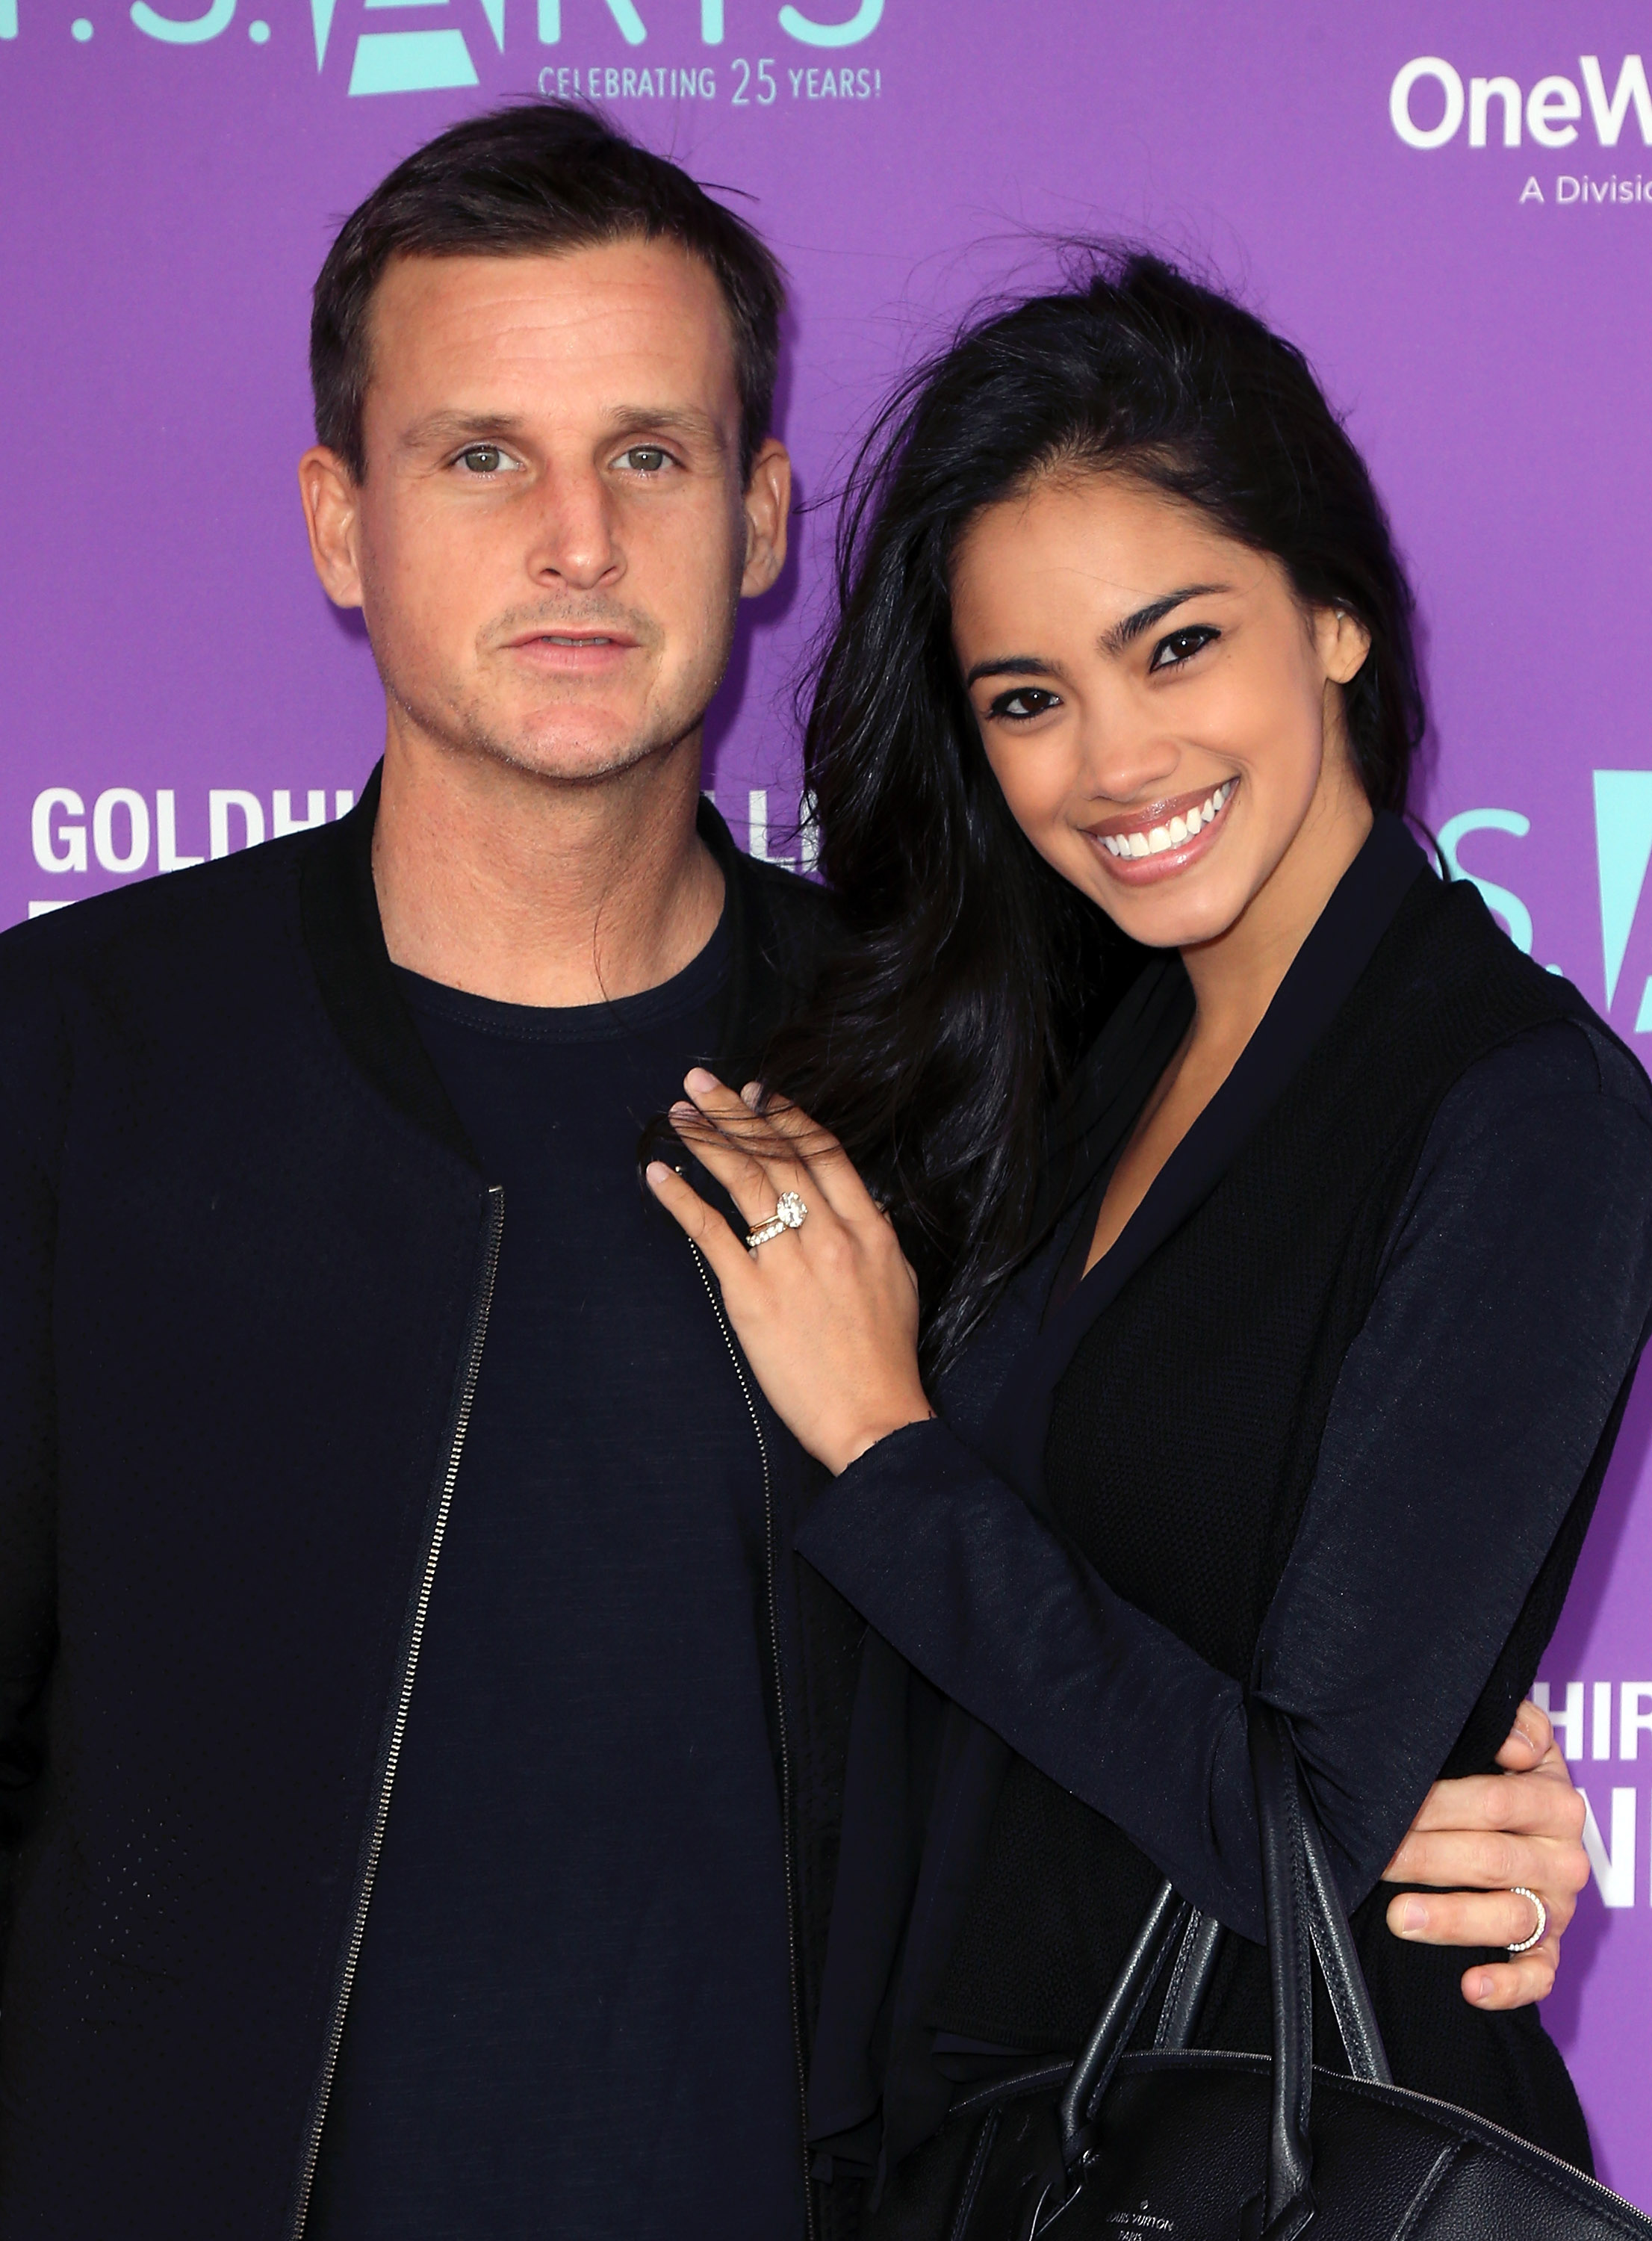 Rob Dyrdek and Bryiana Dyrdek attend Express Yourself 2015 presented by P.S. ARTS at Barker Hangar on November 15, 2015, in Santa Monica, California. | Source: Getty Images